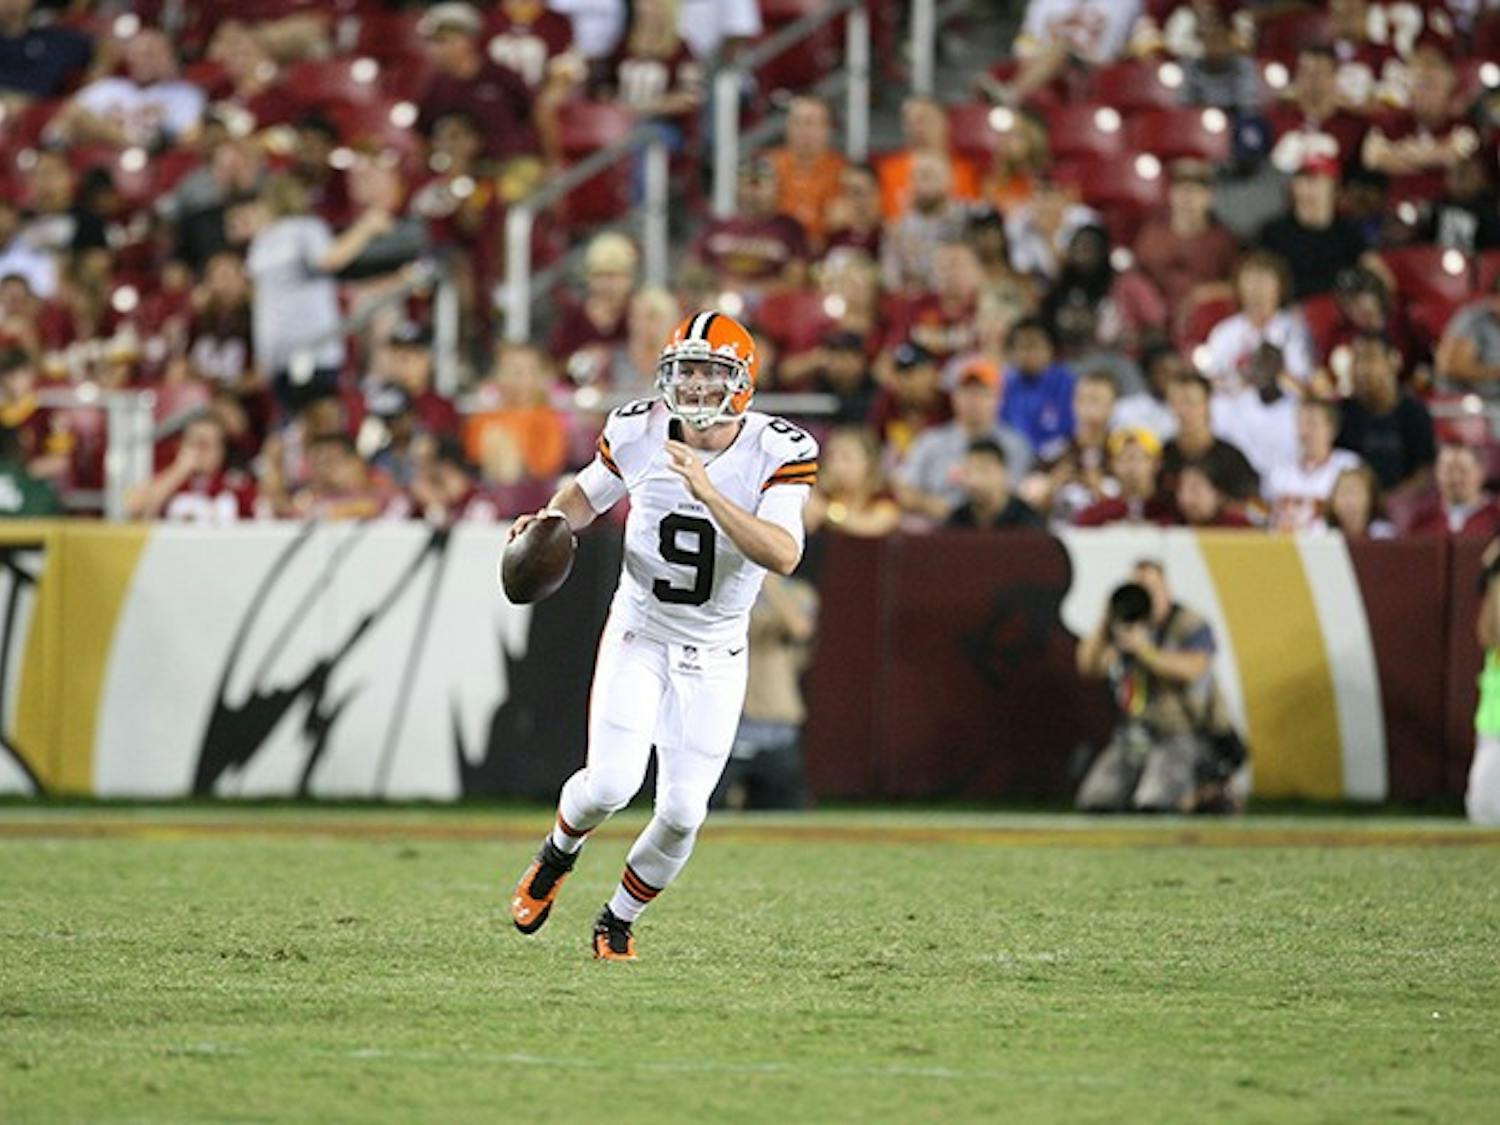 In Connor Shaw's first NFL action, he went 8-for-9 for 123 yards and a touchdown.